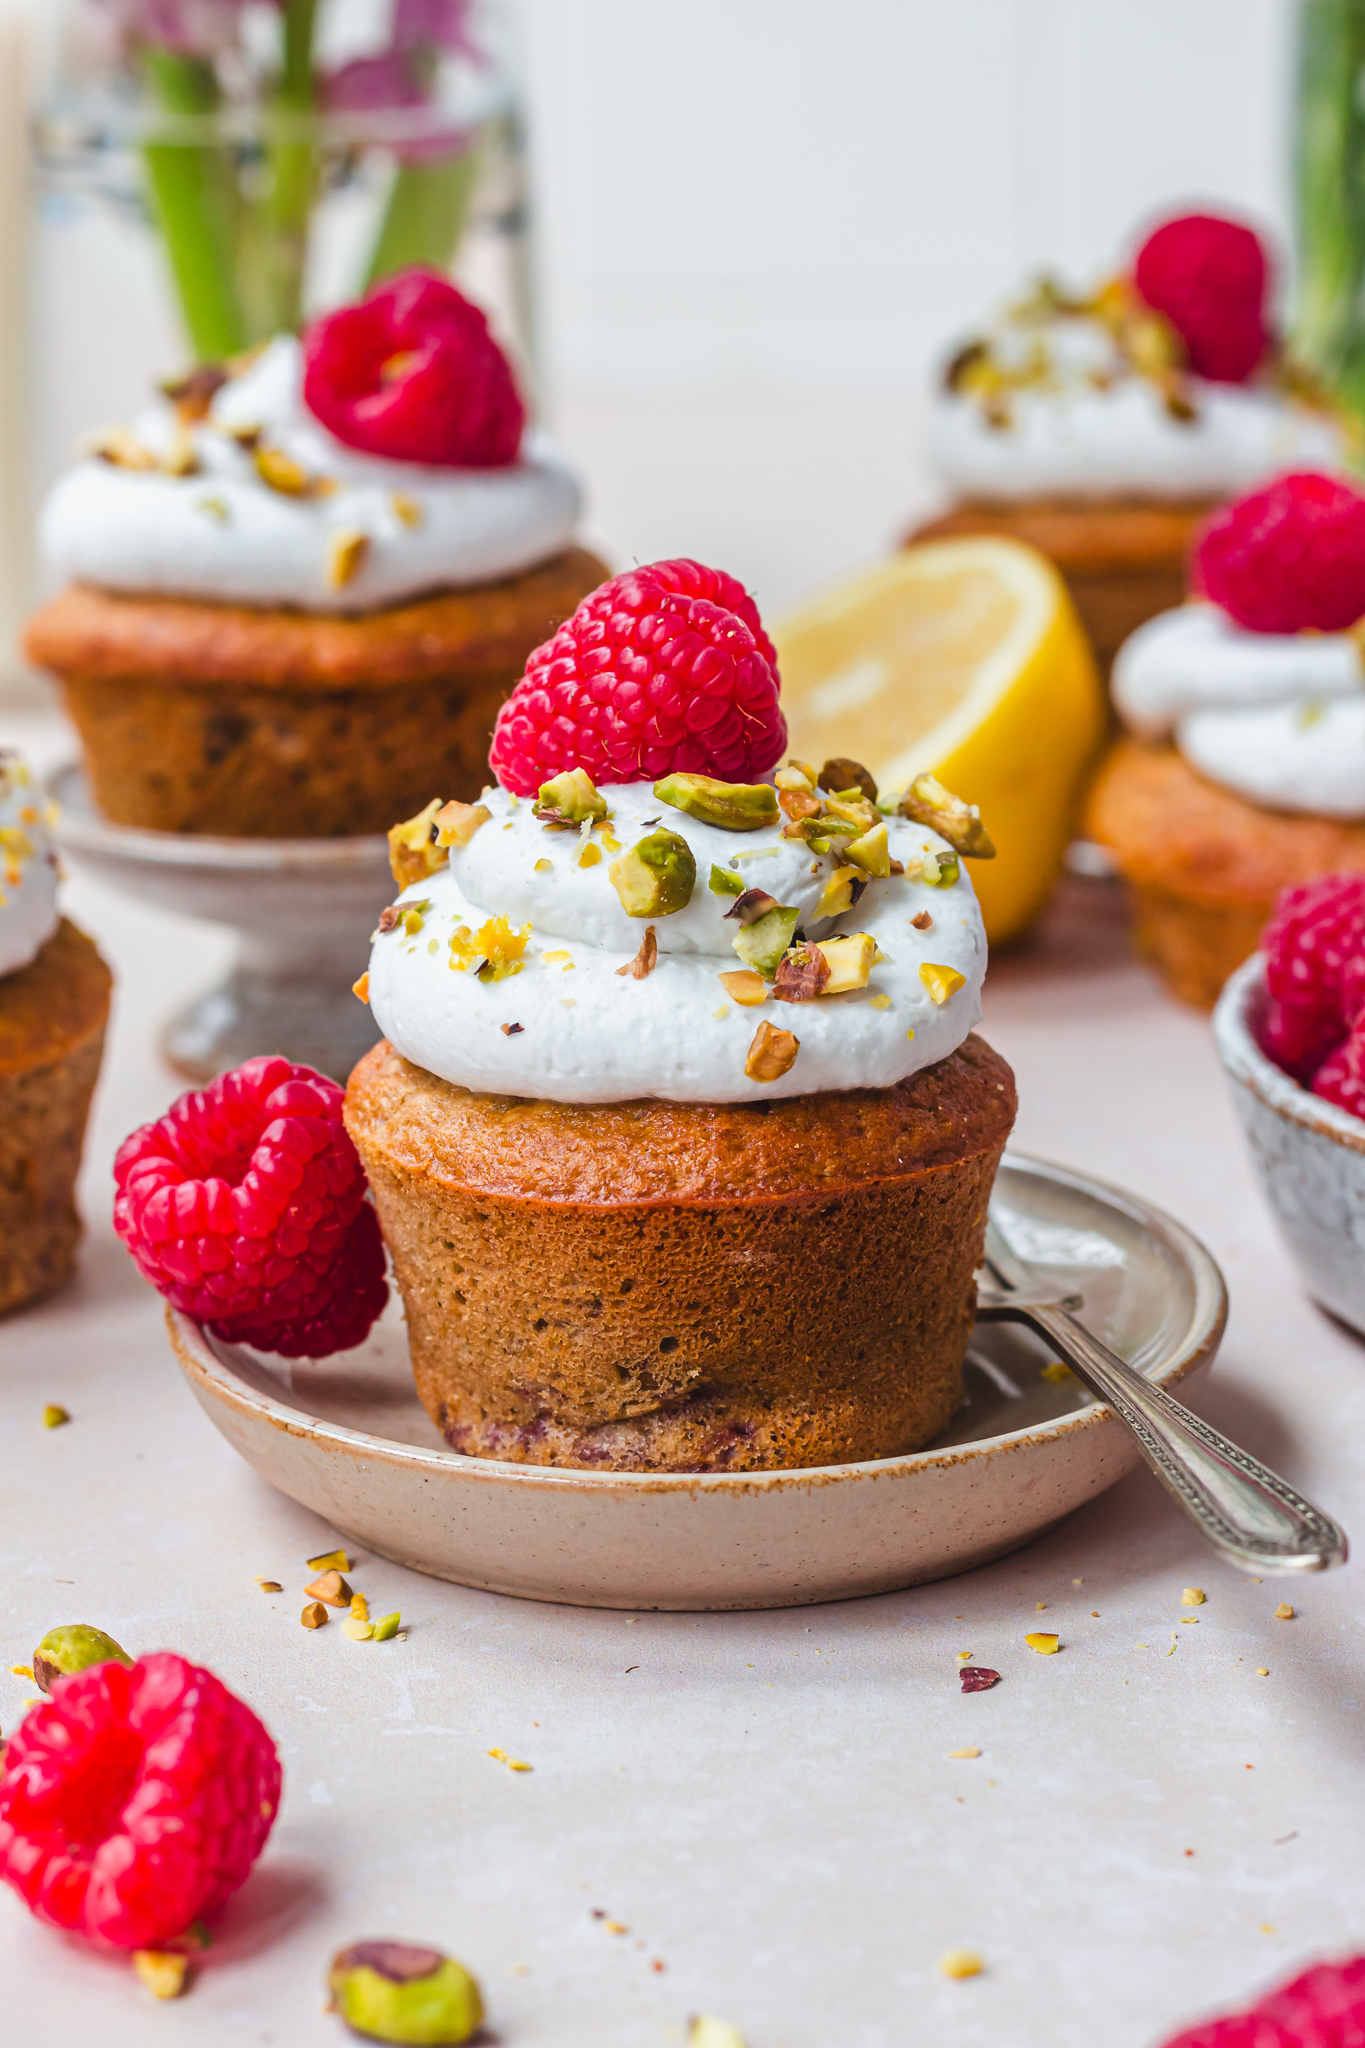 A Lemon Raspberry and Pistachio Muffin on a small plate